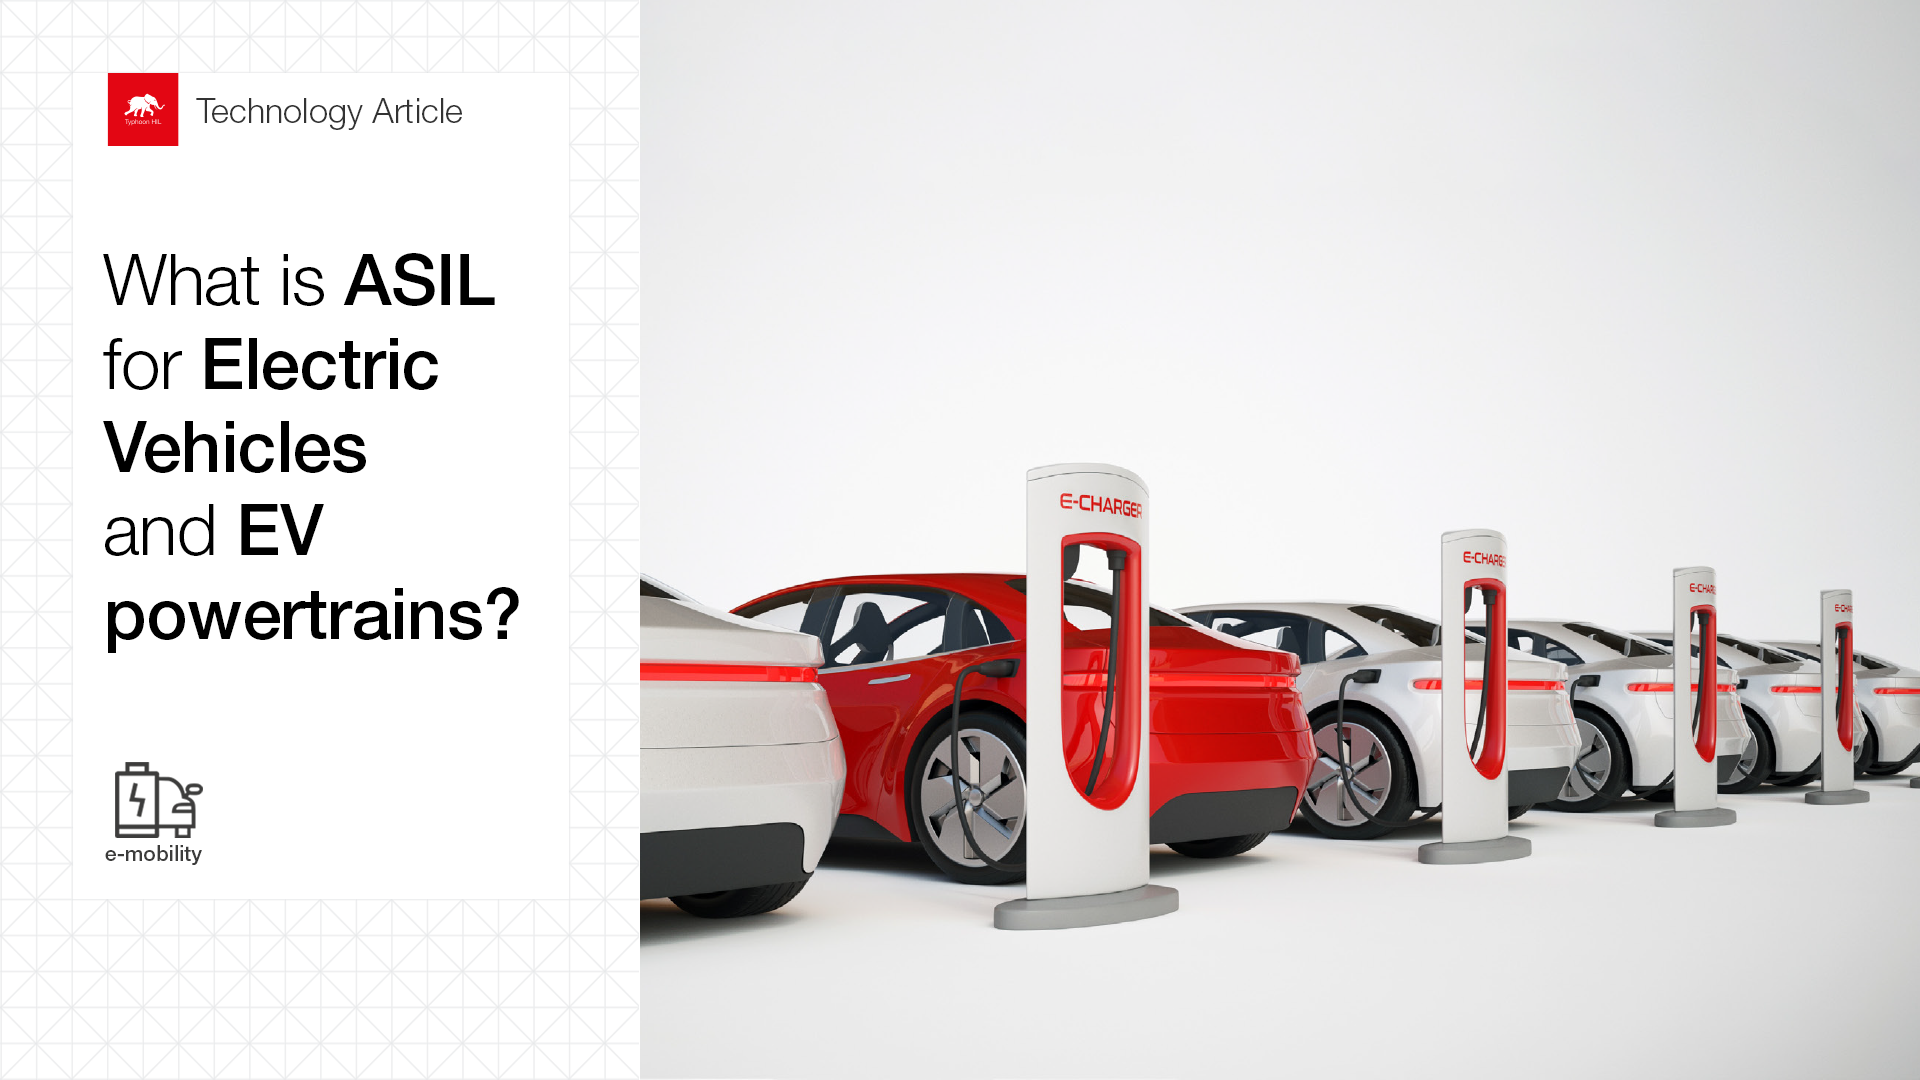 What is ASIL for Electric Vehicles and EV powertrains?